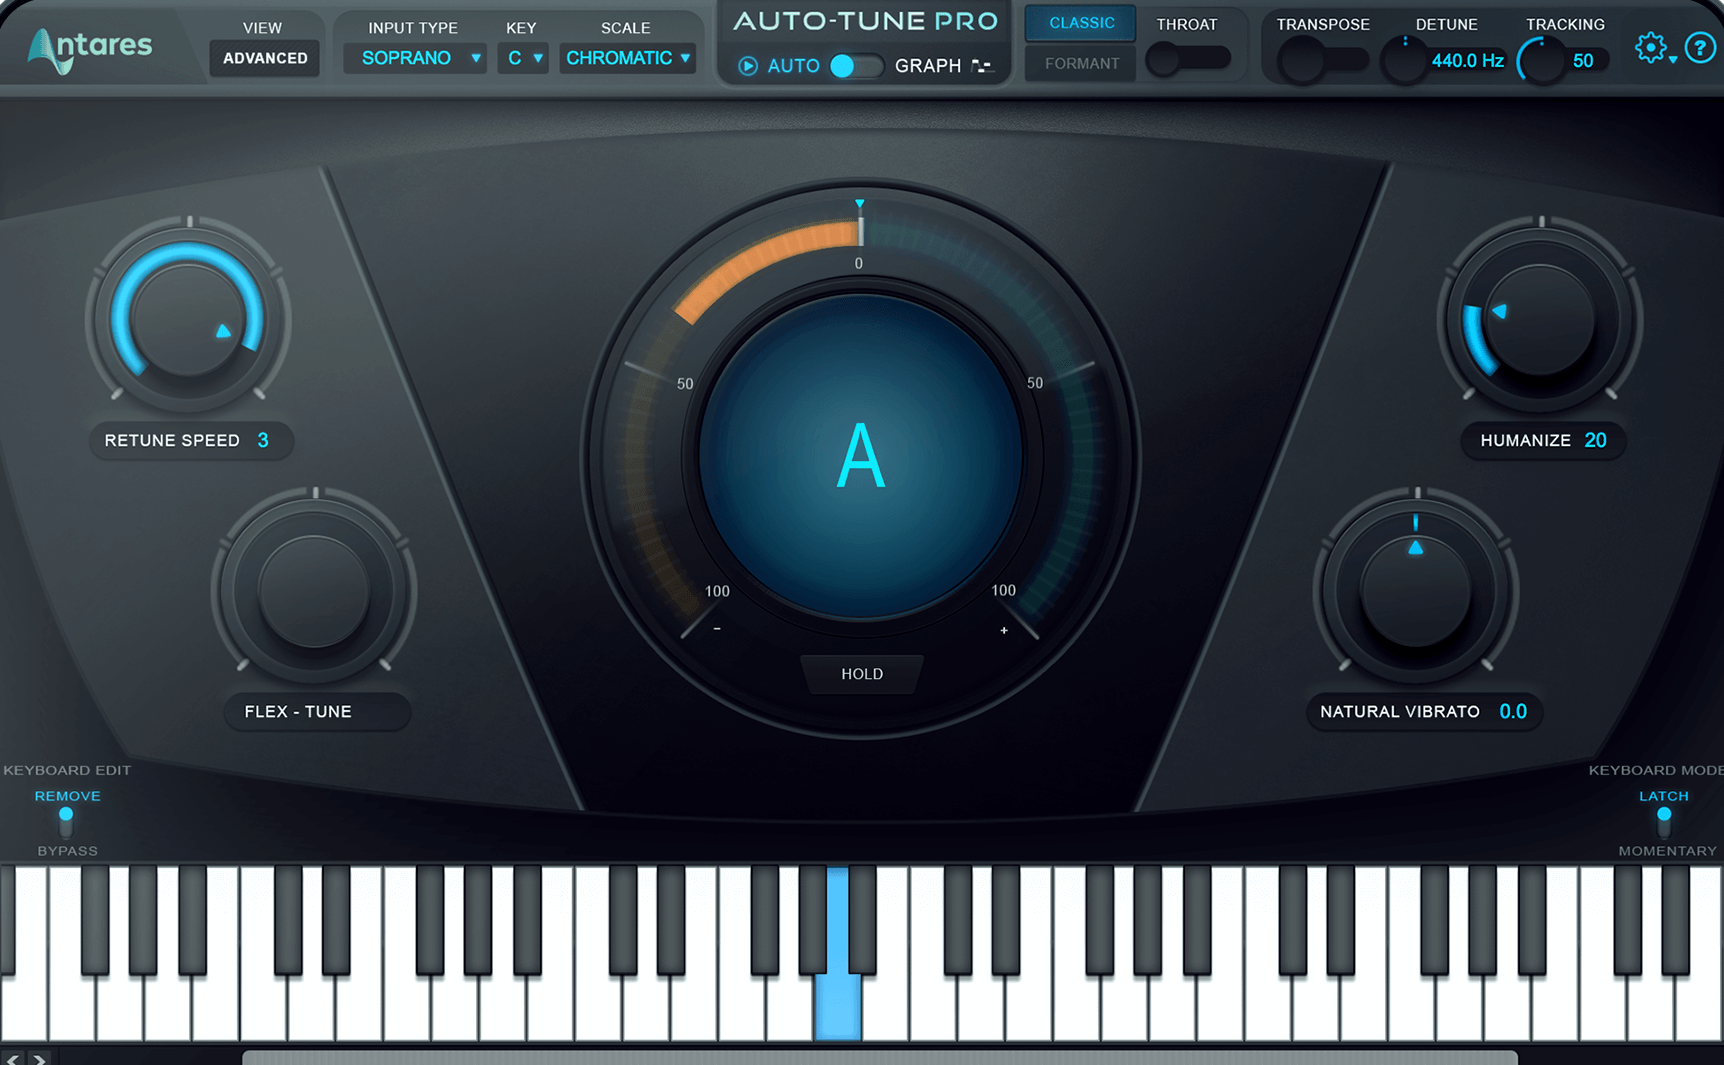 Antares auto tune pro download crack android flashing software for pc free download